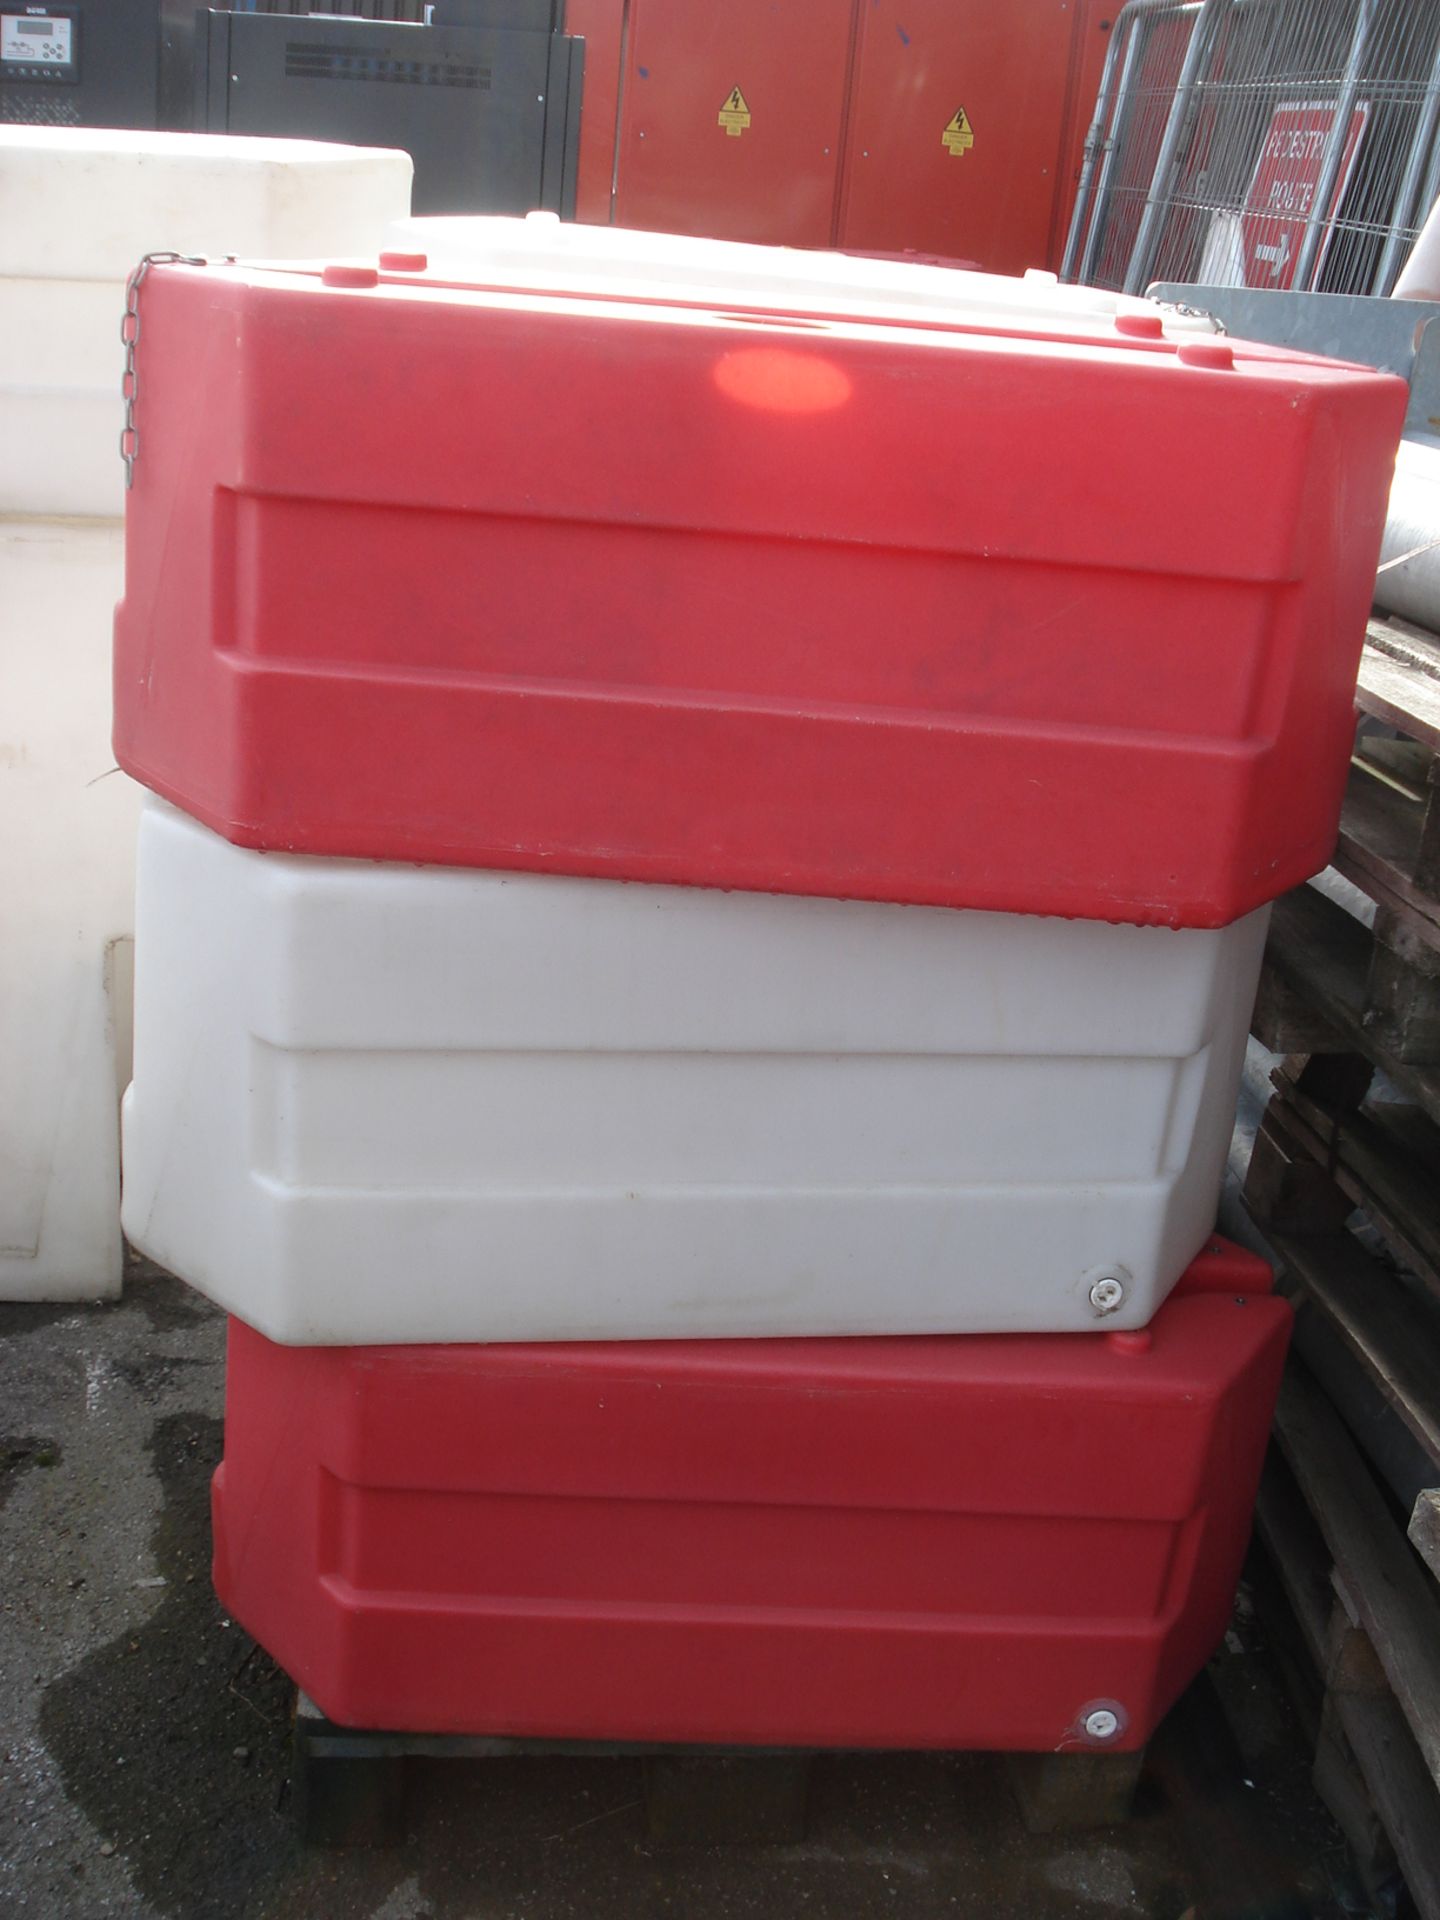 Red/White Plastic Pedestrian Safety Barriers x 20 - 37" Long x 15" Wide x 16" High - Image 5 of 5